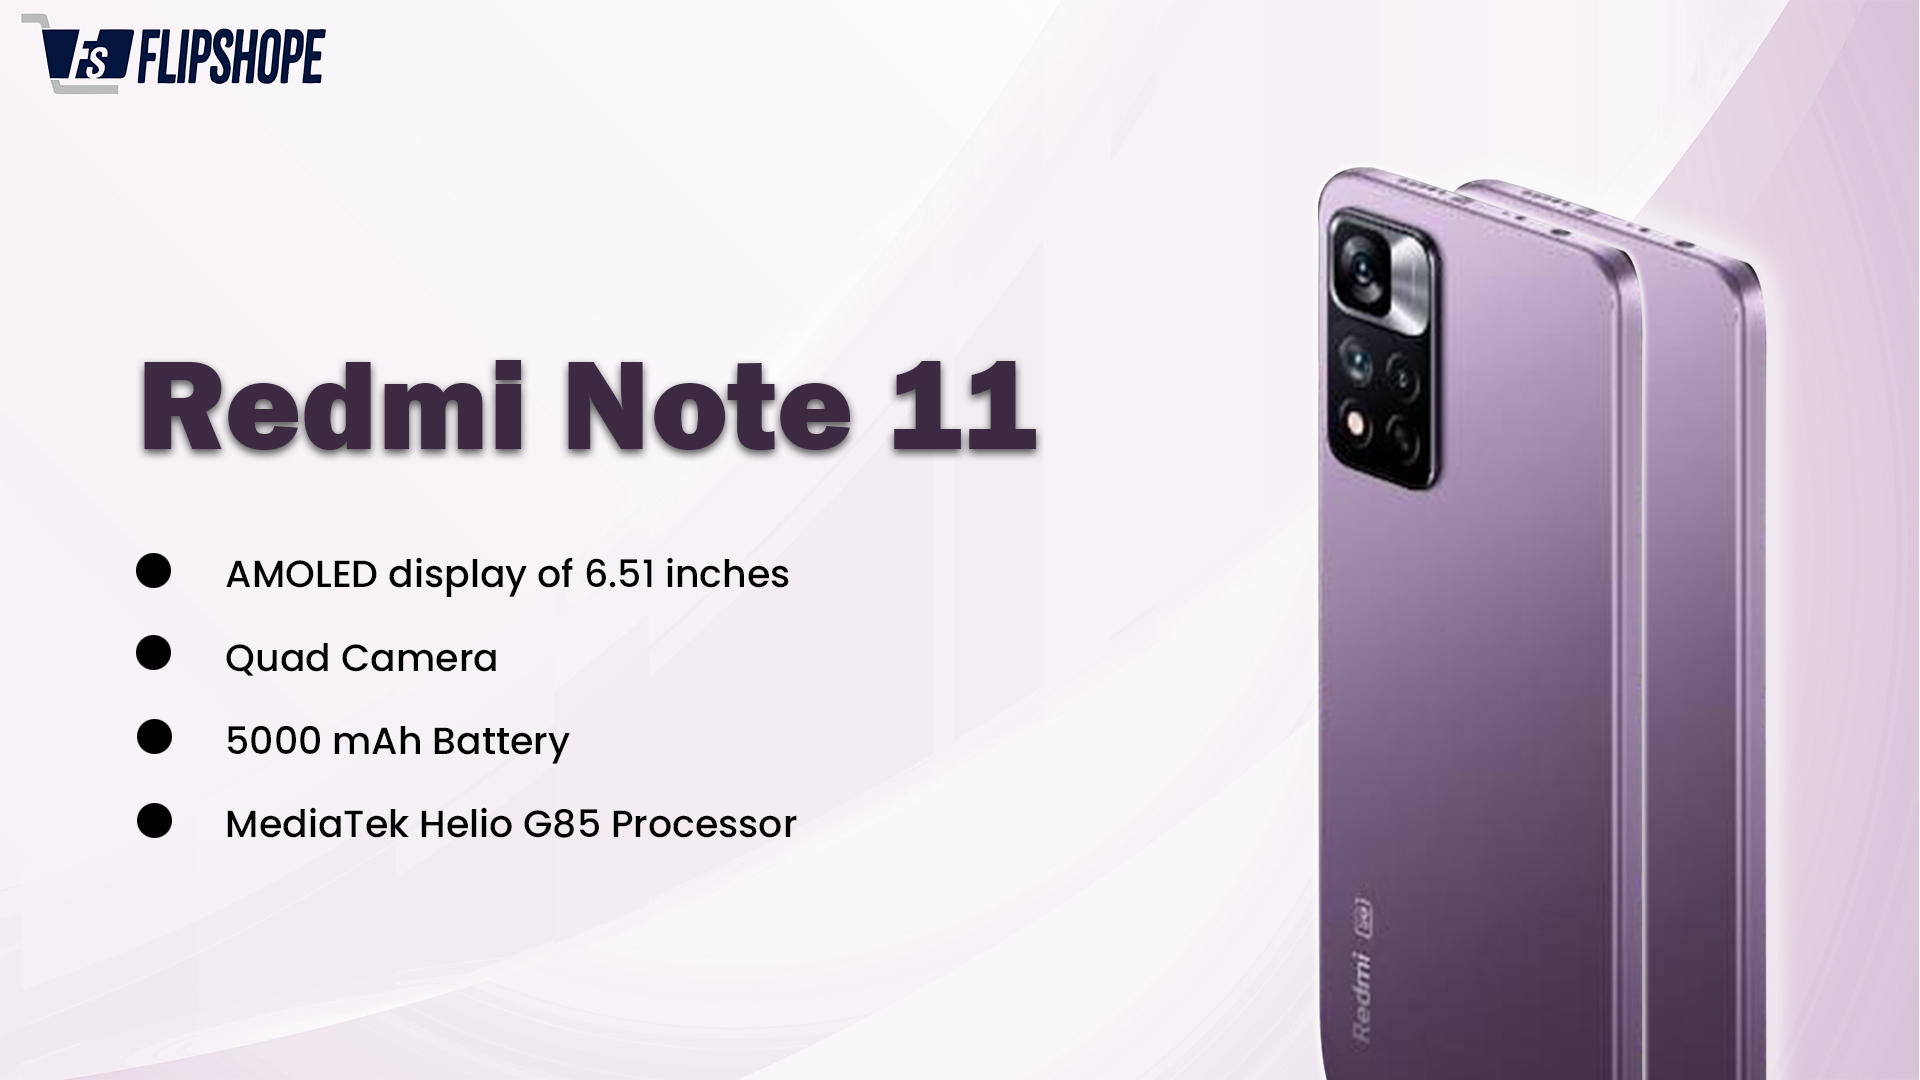 Redmi Note 11 Specifications